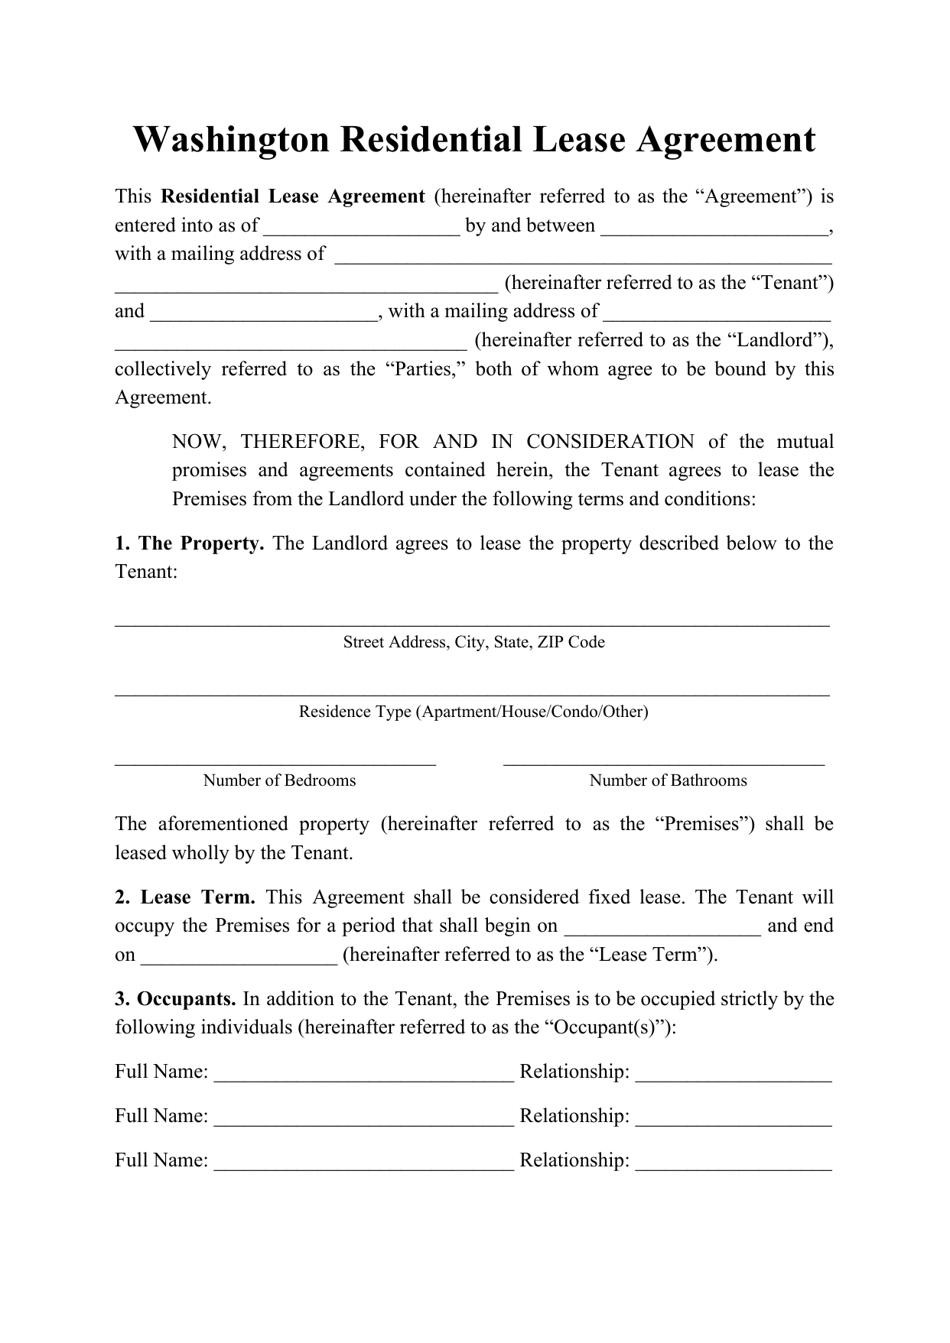 washington-residential-lease-agreement-template-fill-out-sign-online-and-download-pdf